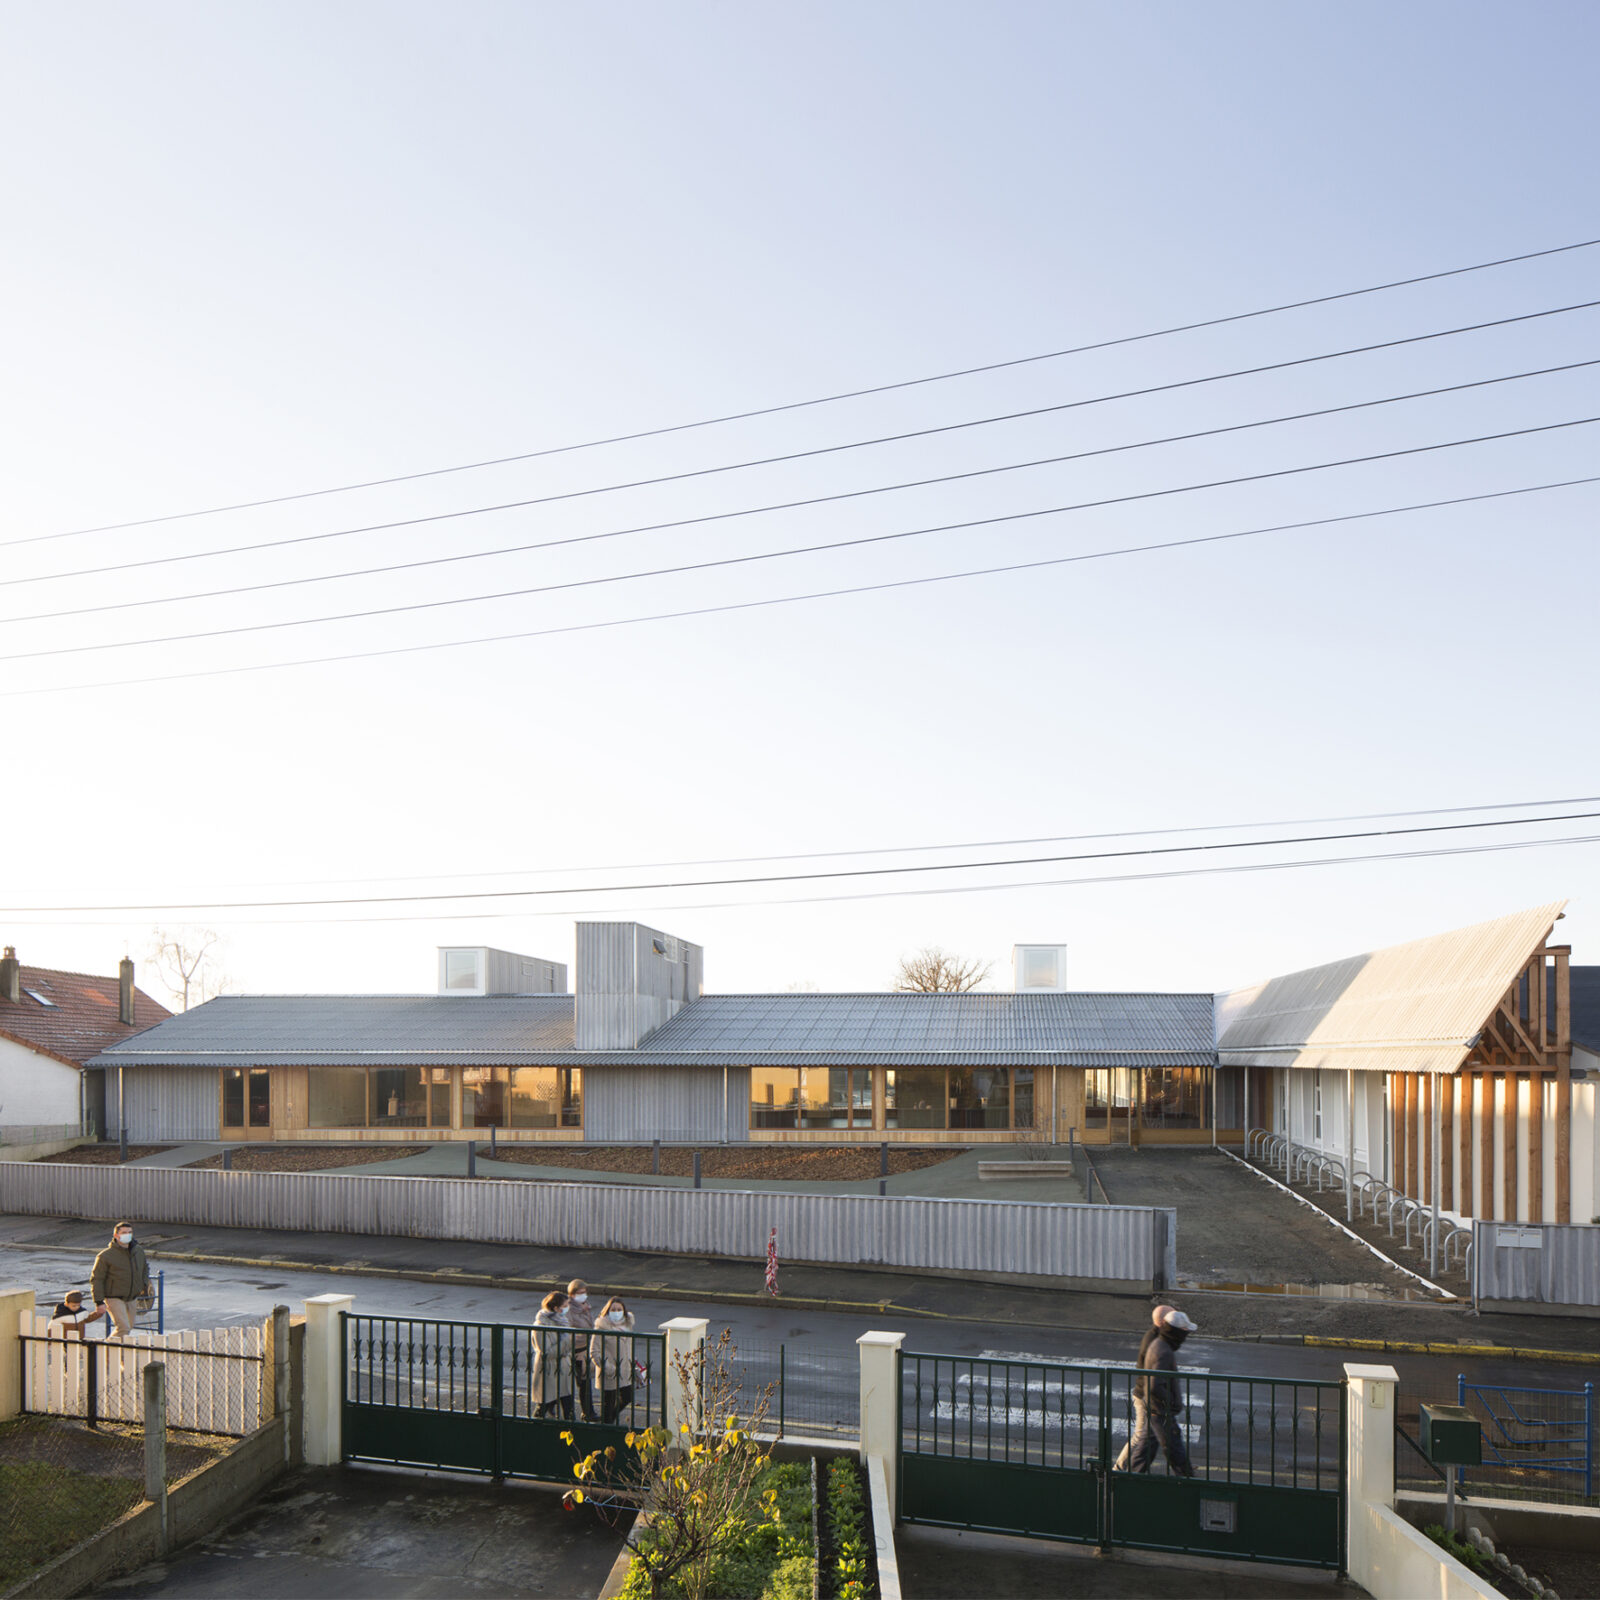 Archisearch Dexamenes Seaside Hotel by K-Studio among the 40 shortlisted works of the 2022 EU Prize for Contemporary Architecture Mies Van Der Rohe Award